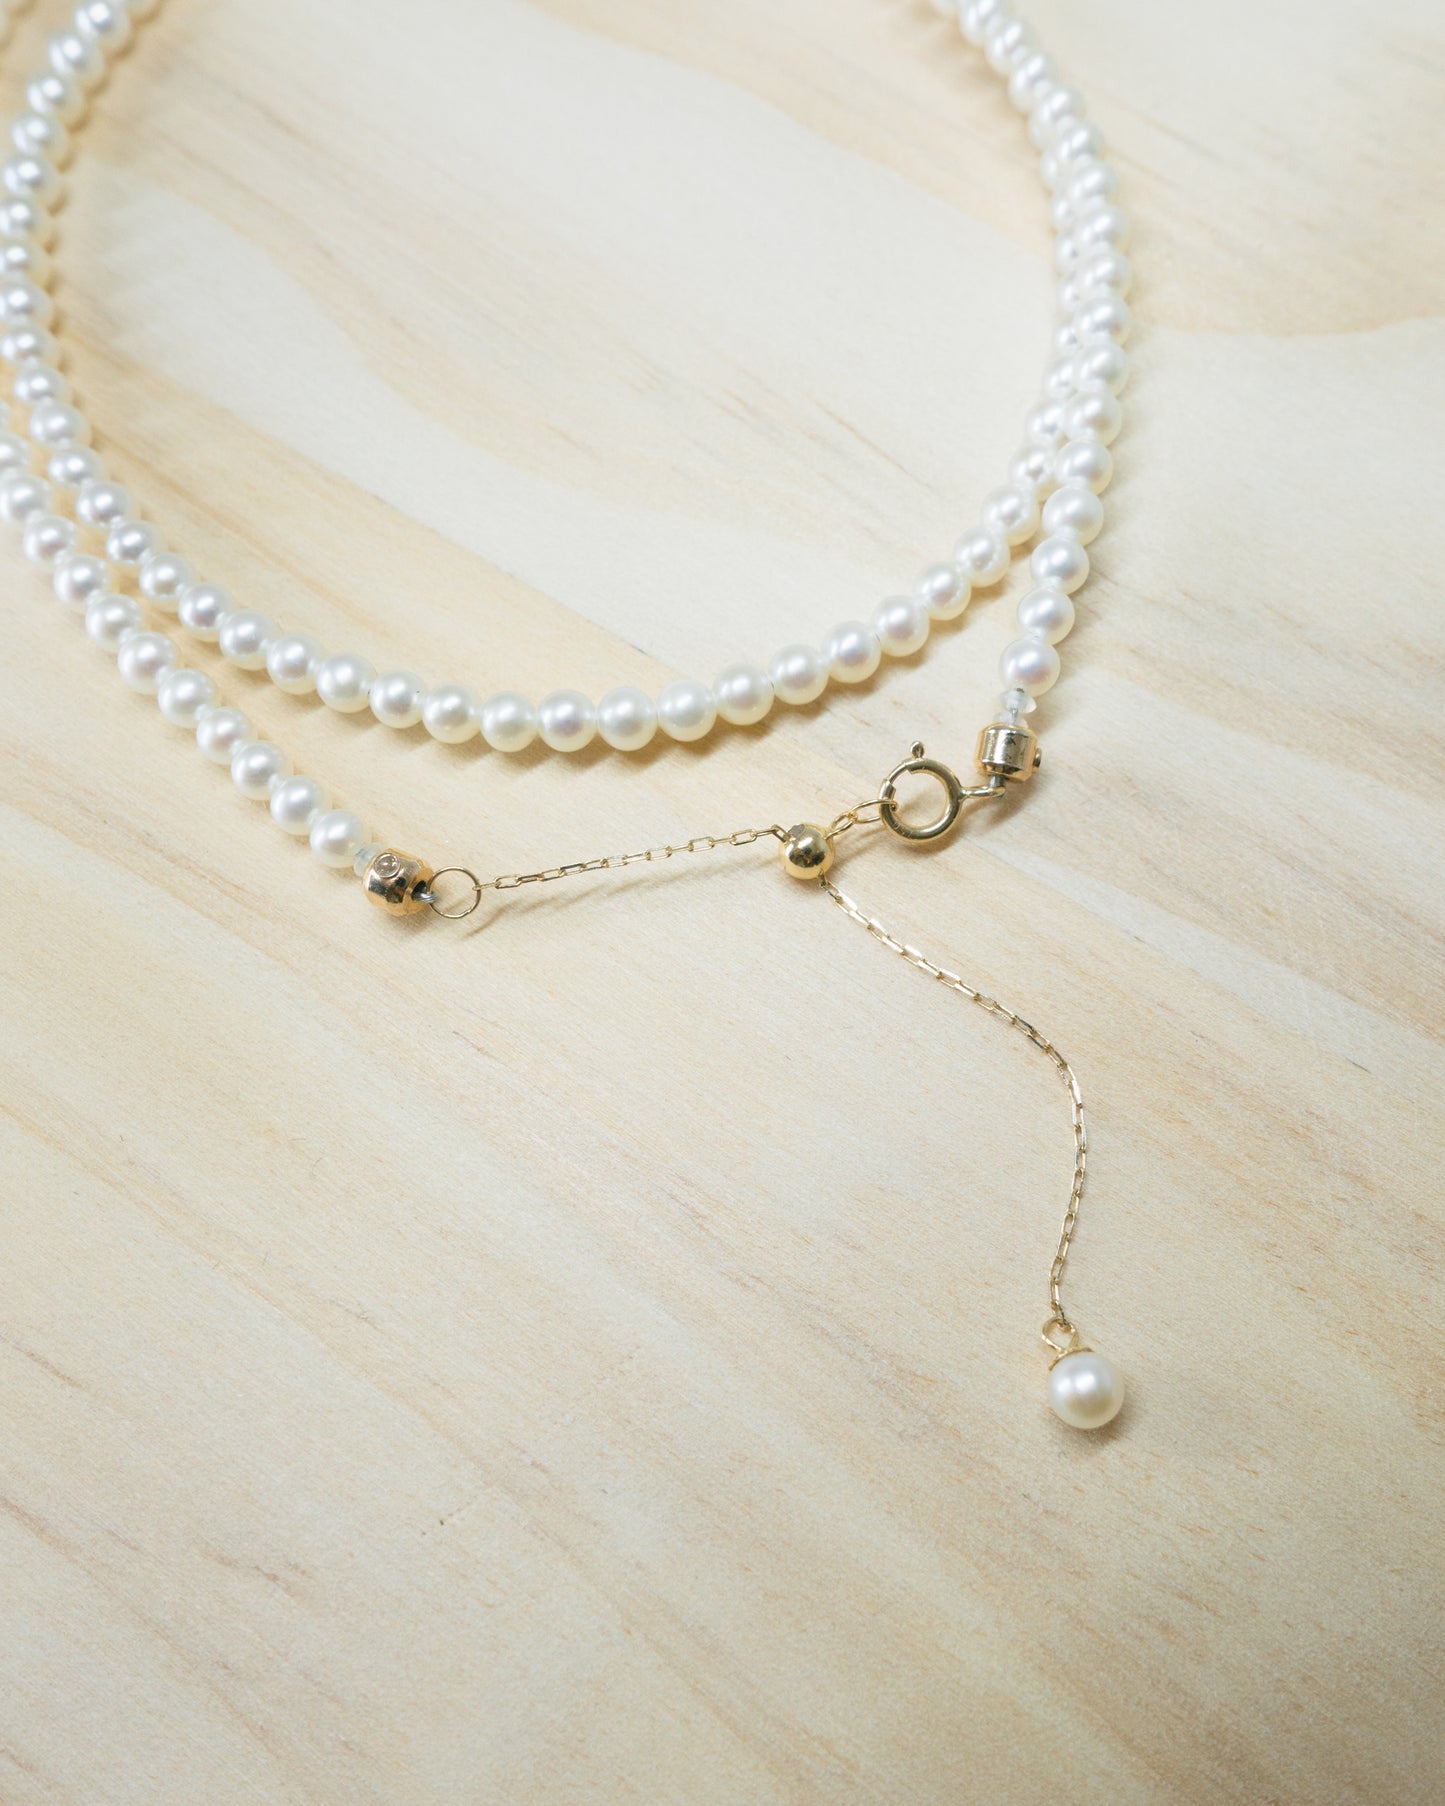 Petite pearl wire necklace